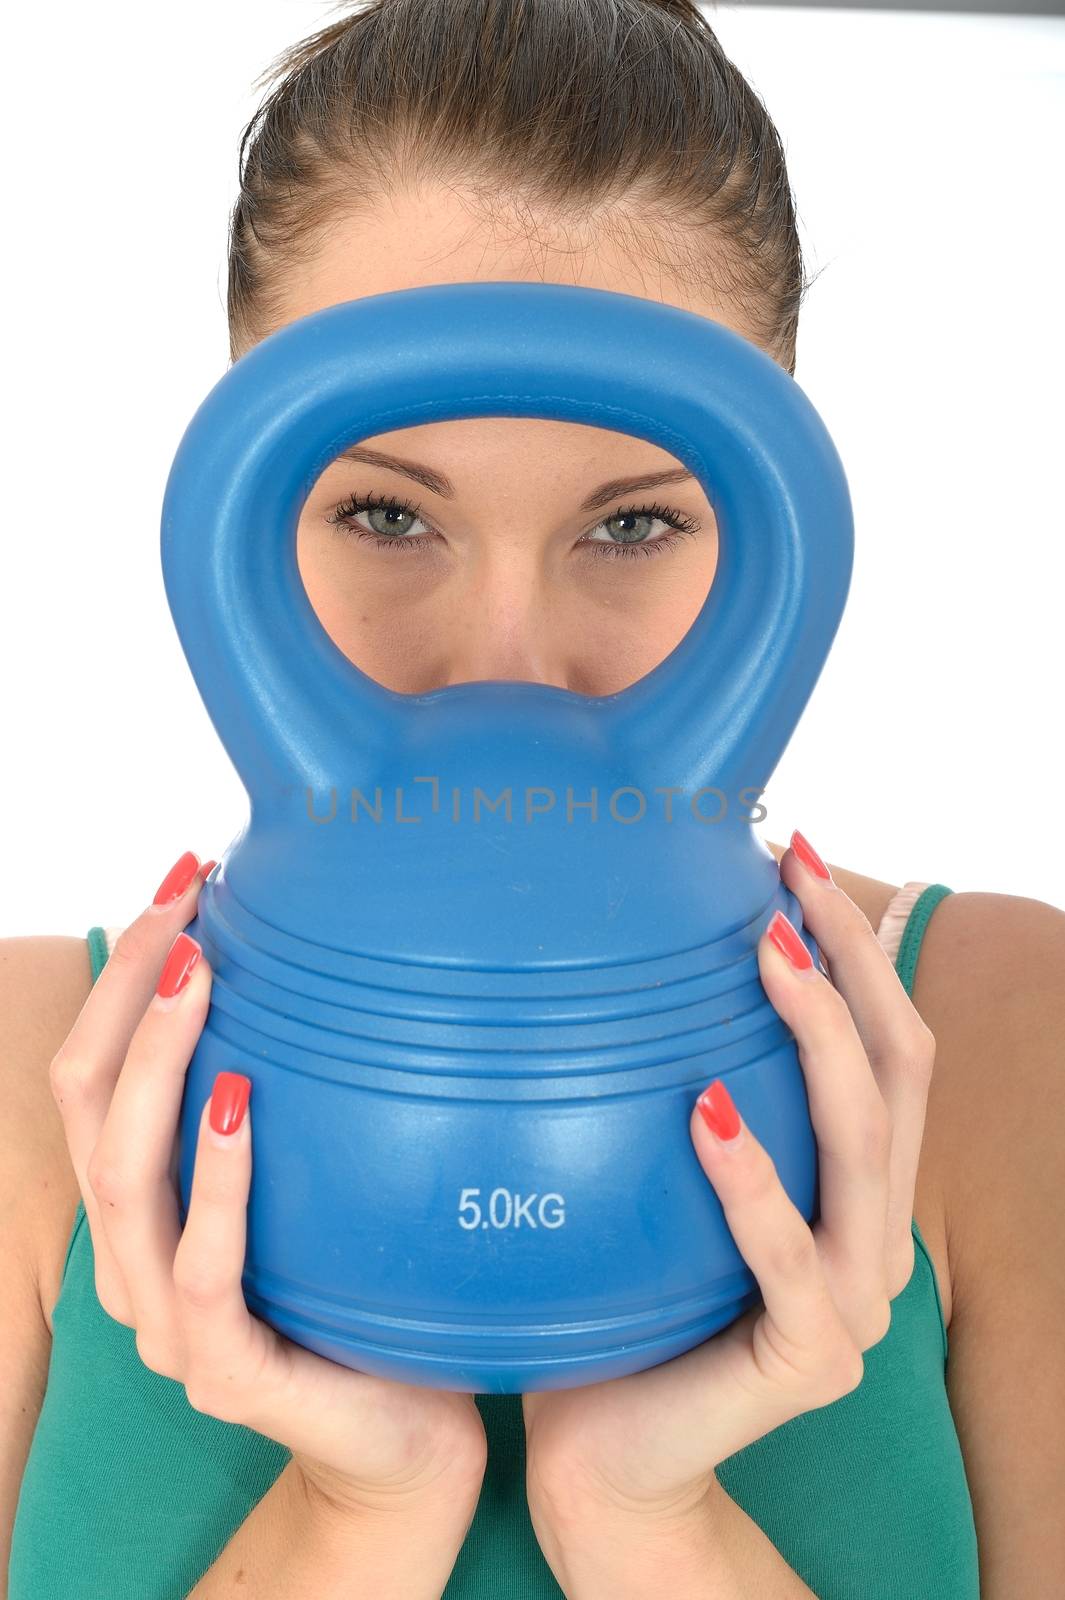 Young Woman Holding and Looking Through a 5kg Kettle Bell Weight by Whiteboxmedia